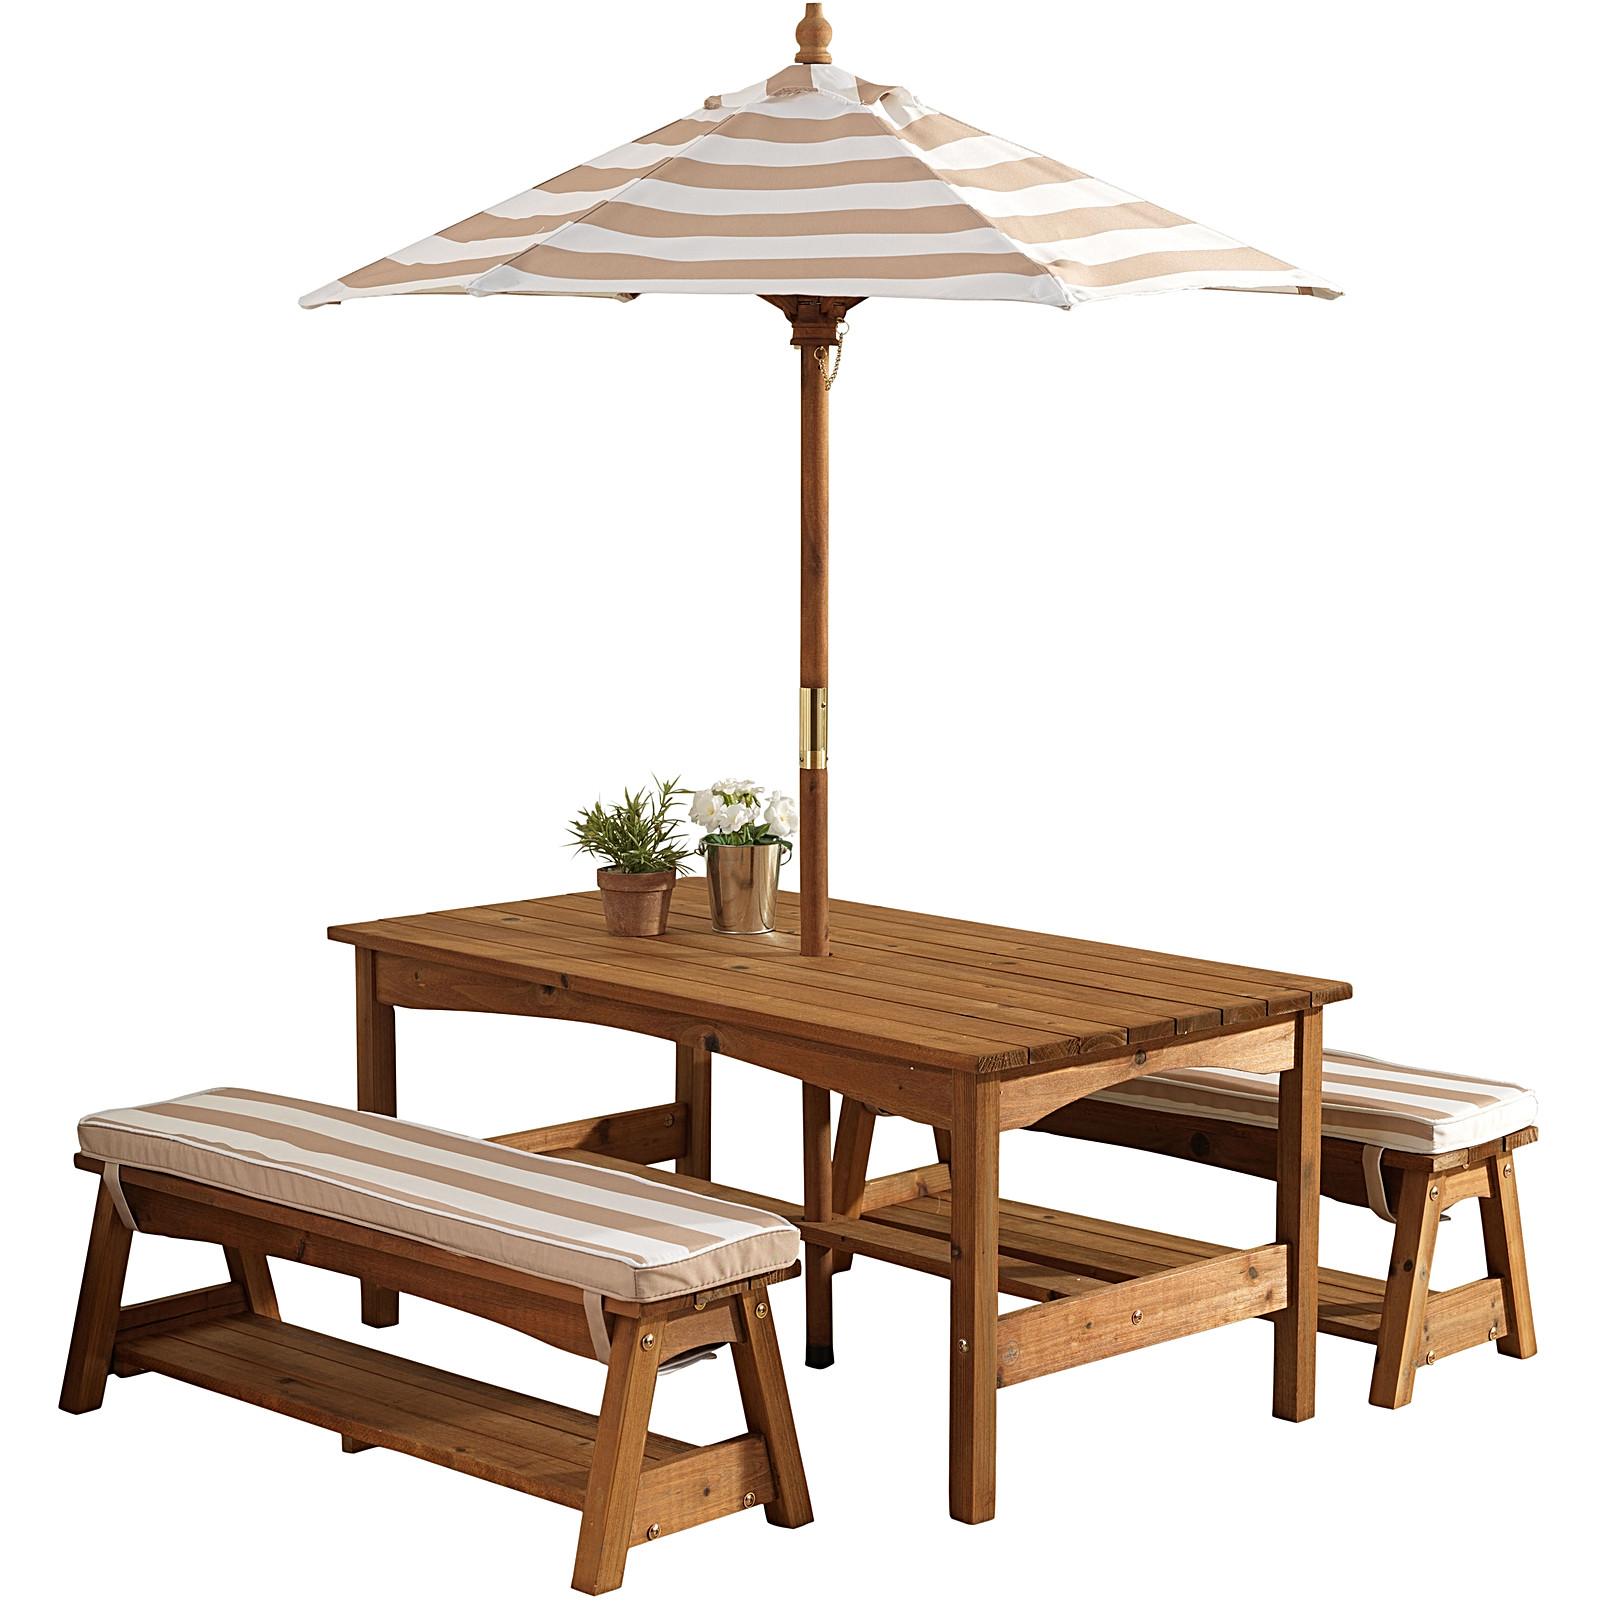 Kids Outdoor Table
 Kids Outdoor Table & Bench Set with Cushions & Umbrella